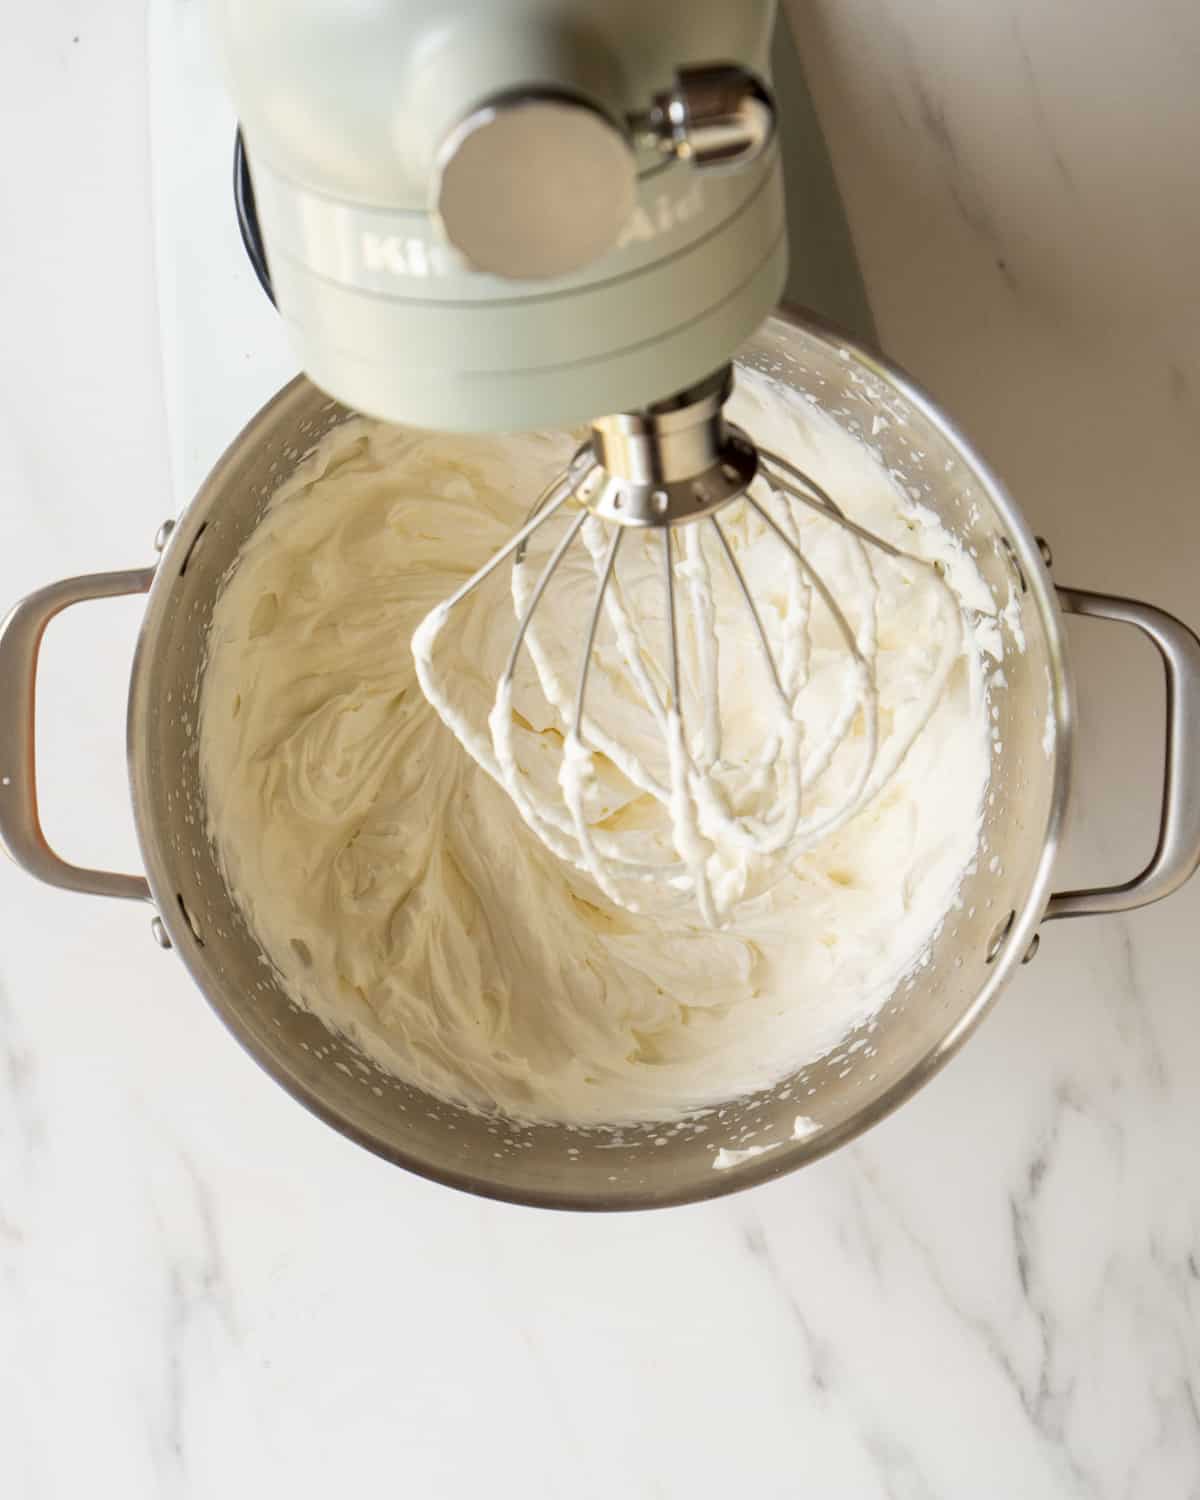 A stand mixer with a bowl full of whipped cream.  